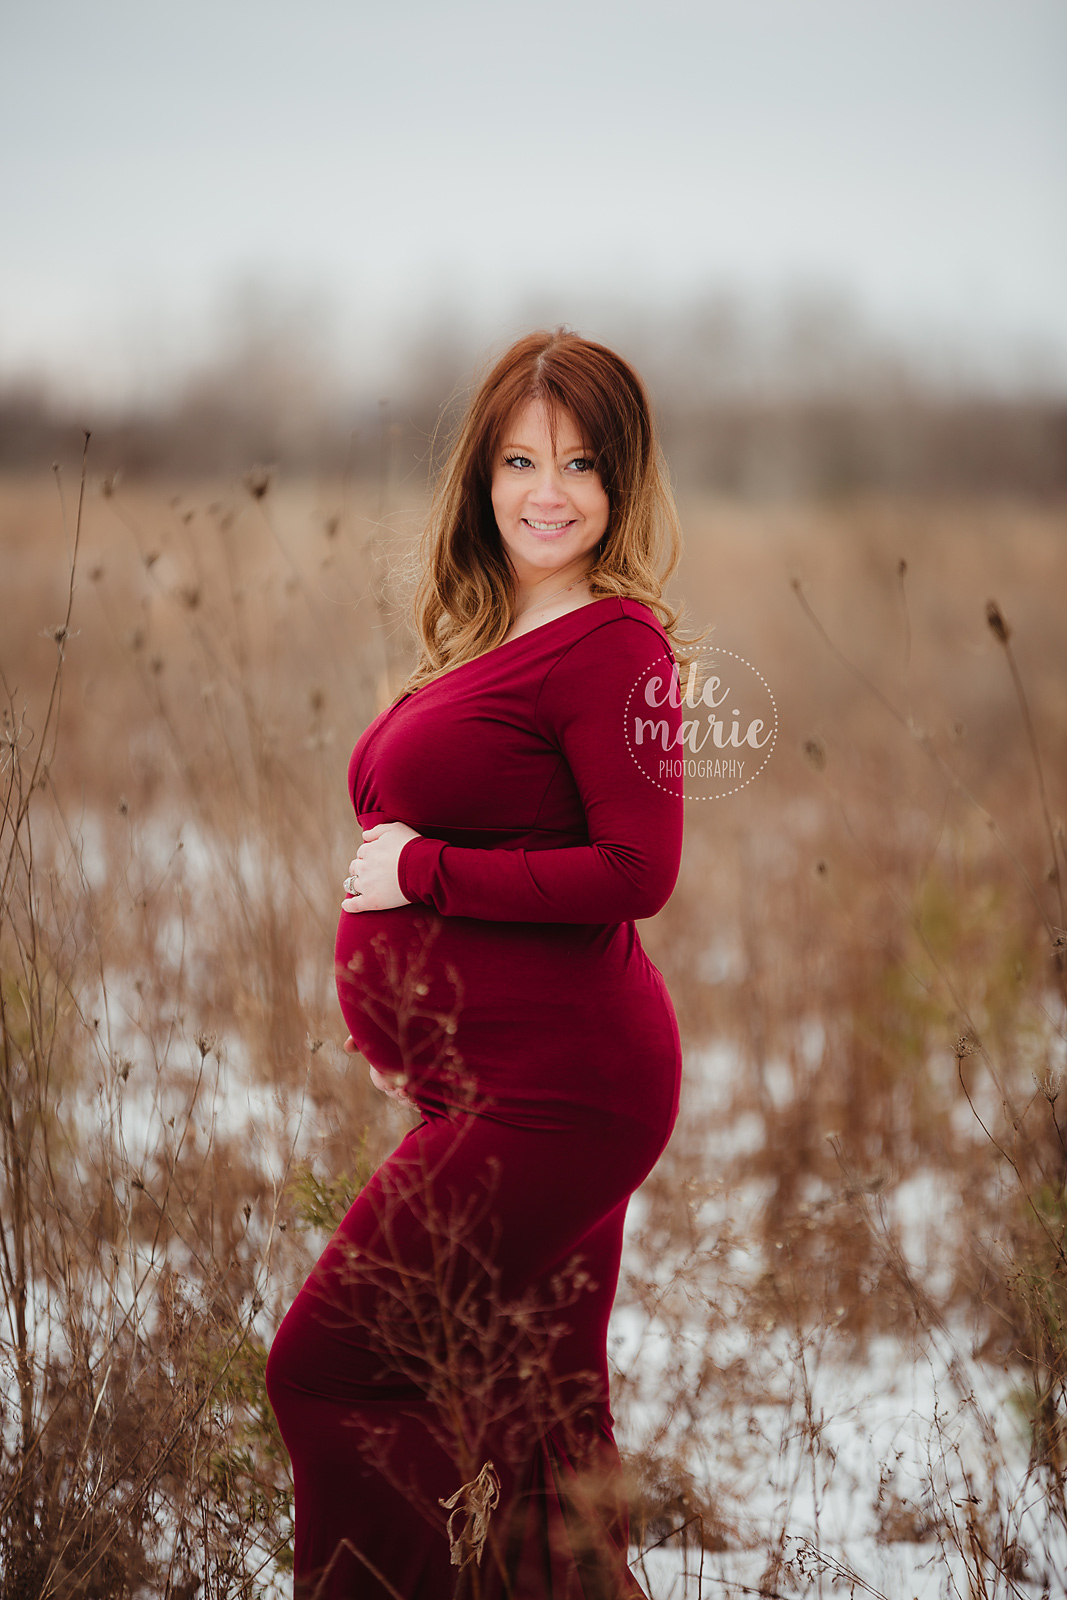 expecting mother in red gown in winter setting, smiling at husband off camera